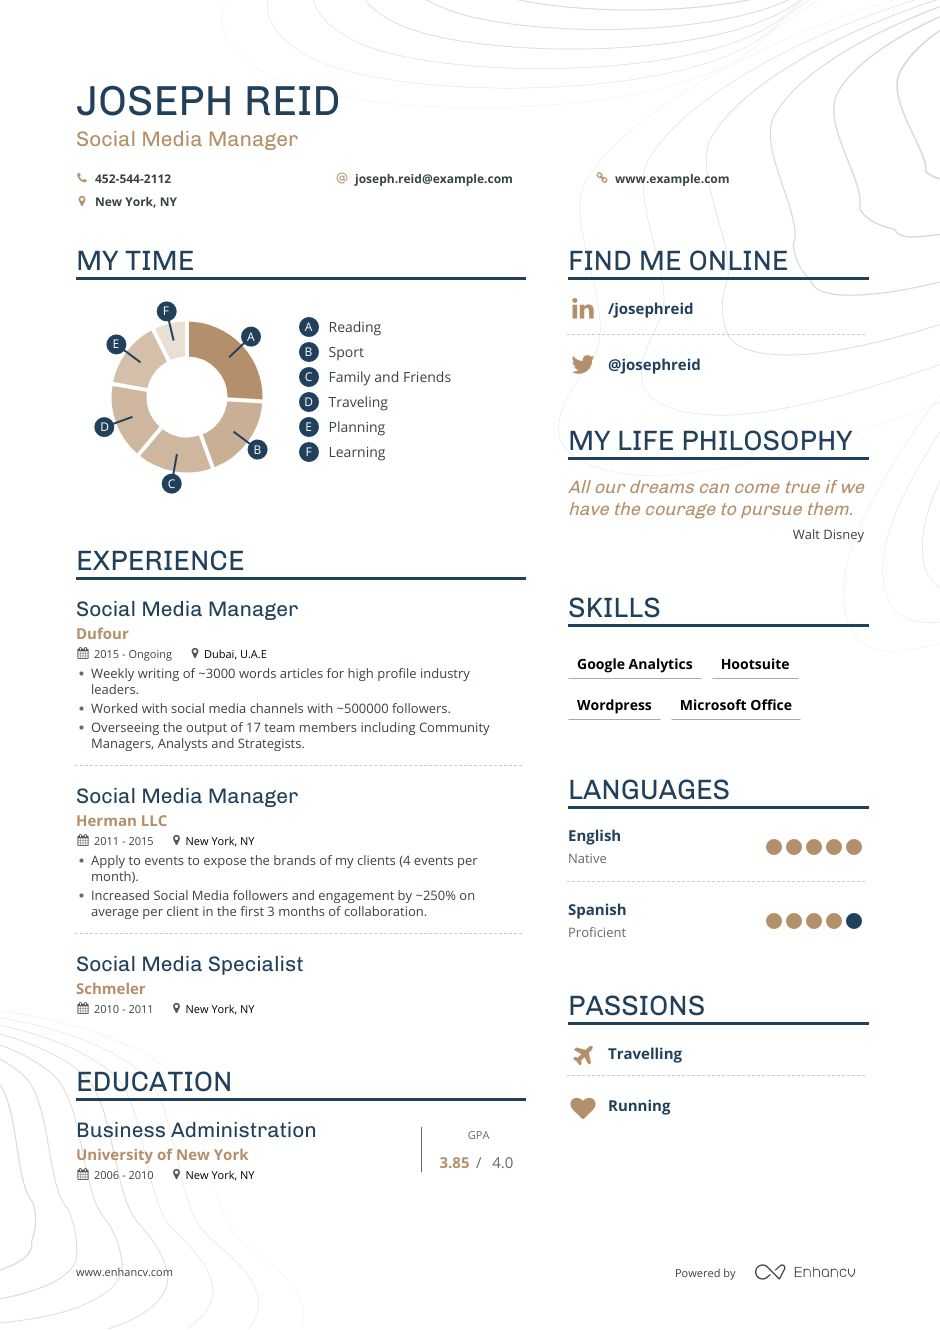 Social Media Manager Resume Examples Skills Templates And More For 2020